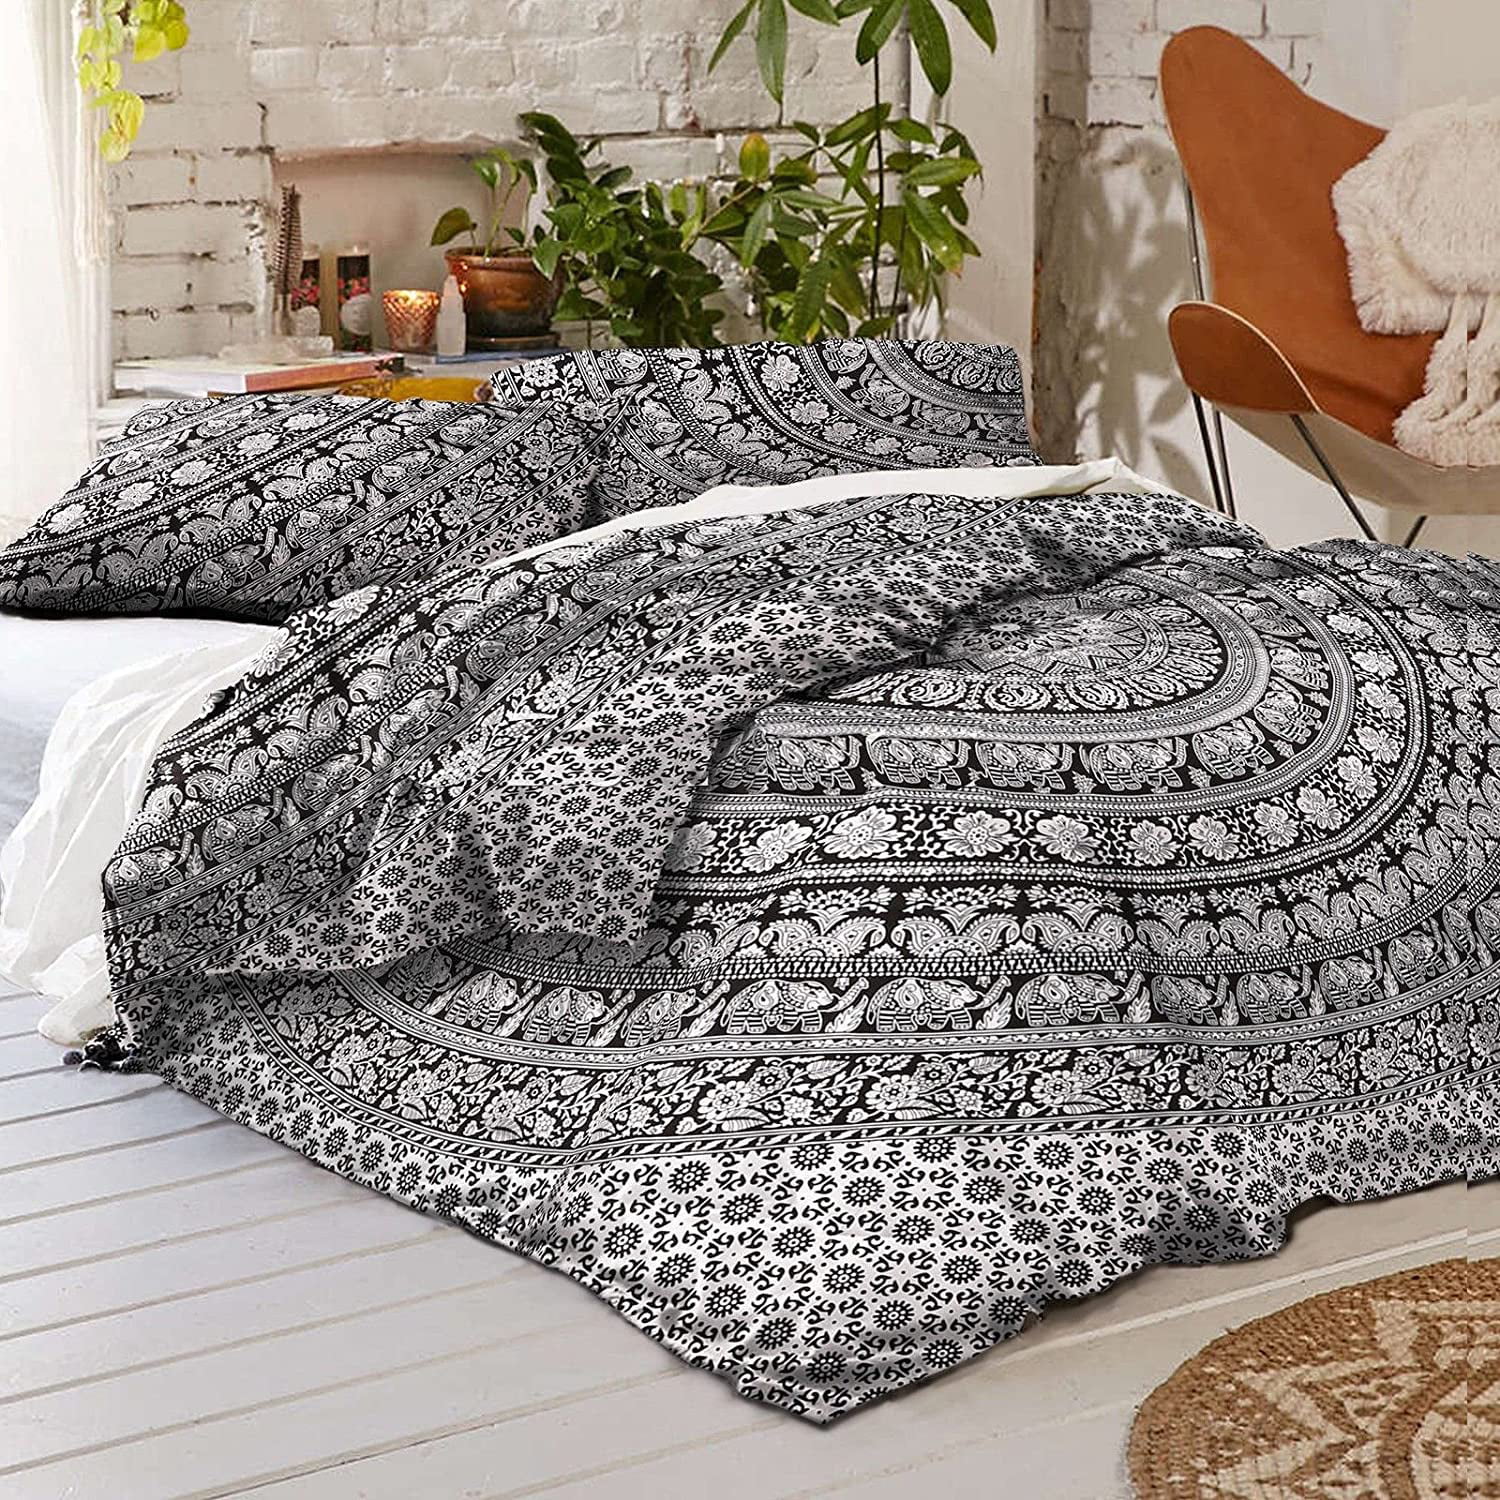 Details about   Mandala Tapestry Wall Hanging Indian Hippie Bedspread Throw Cover Bohemian Decor 